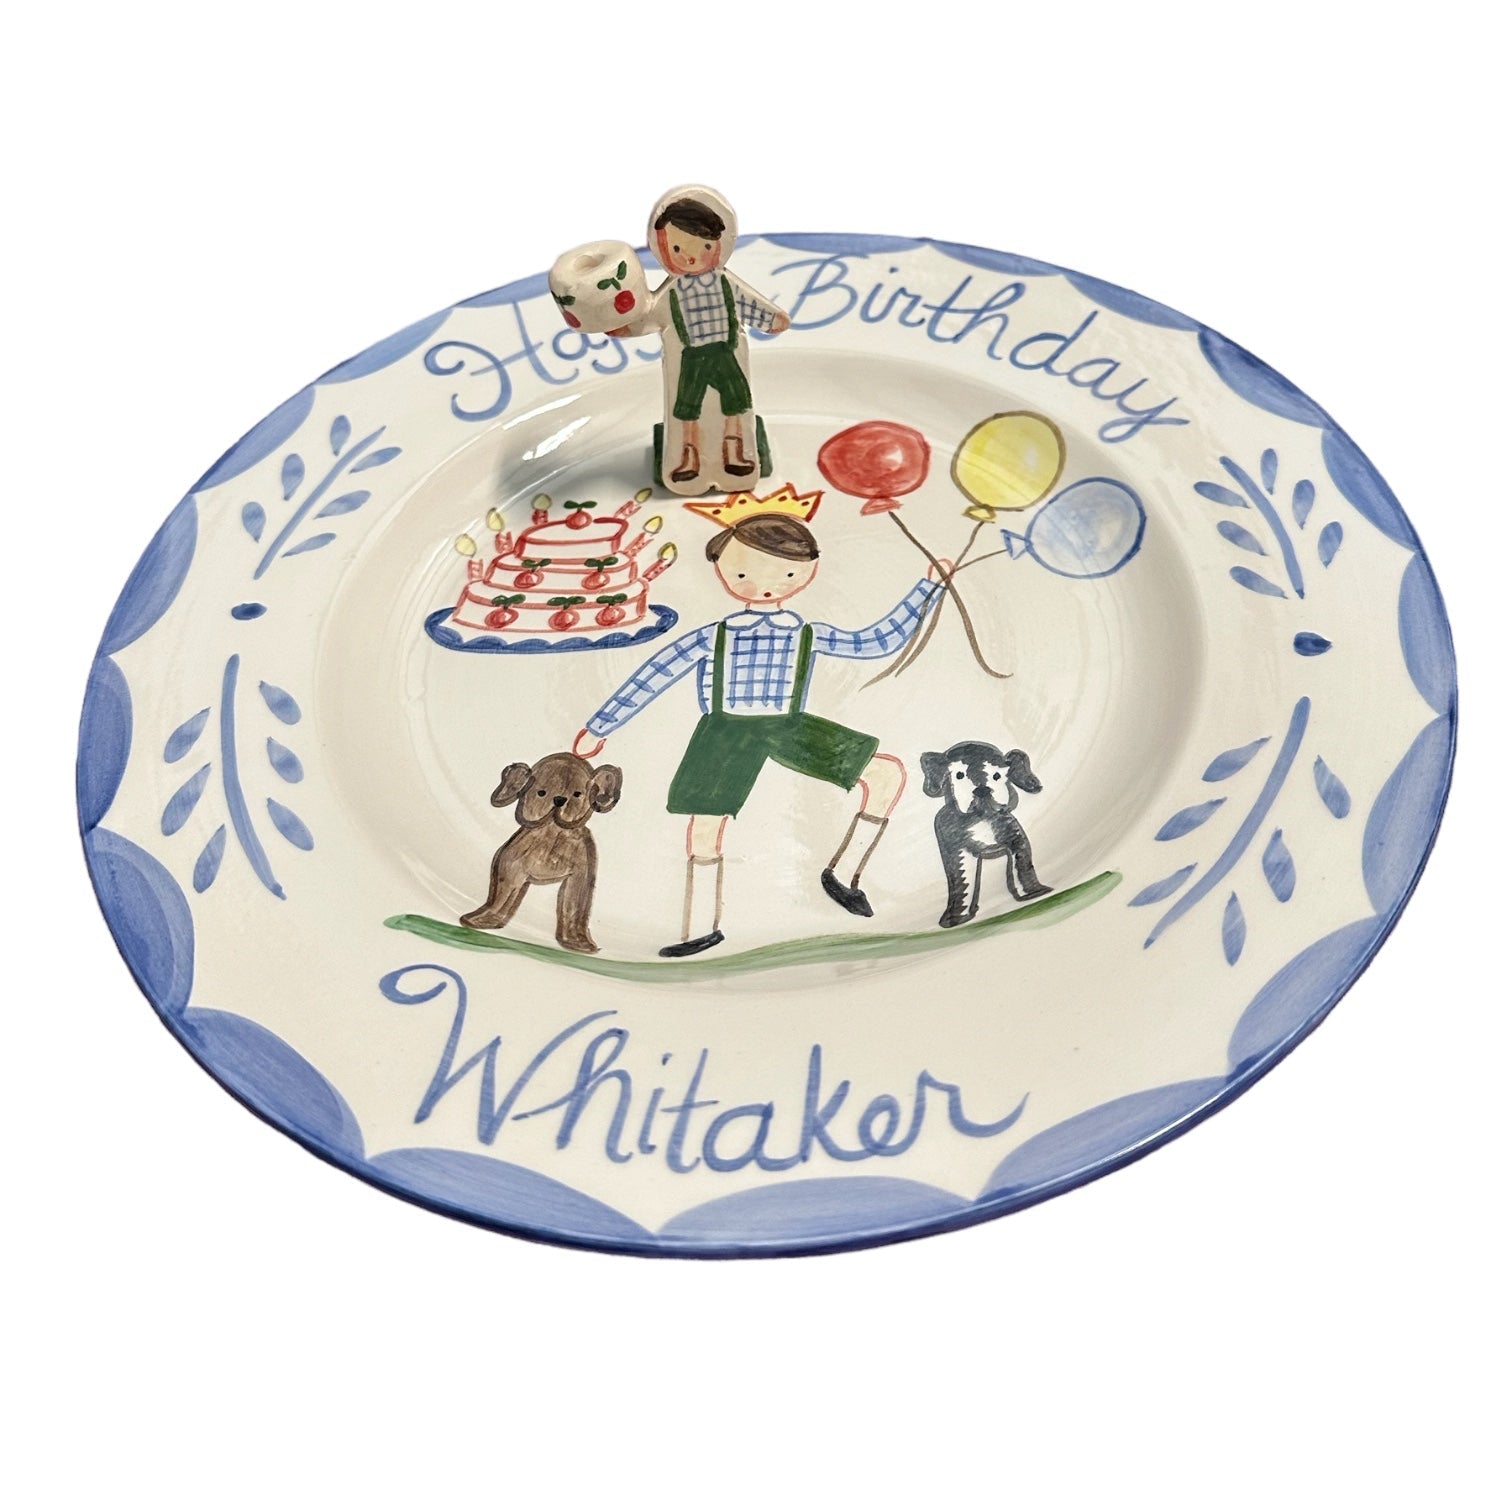 MATCH MY PLATE - Cake Topper - Premium Cake Topper from Tricia Lowenfield Design 